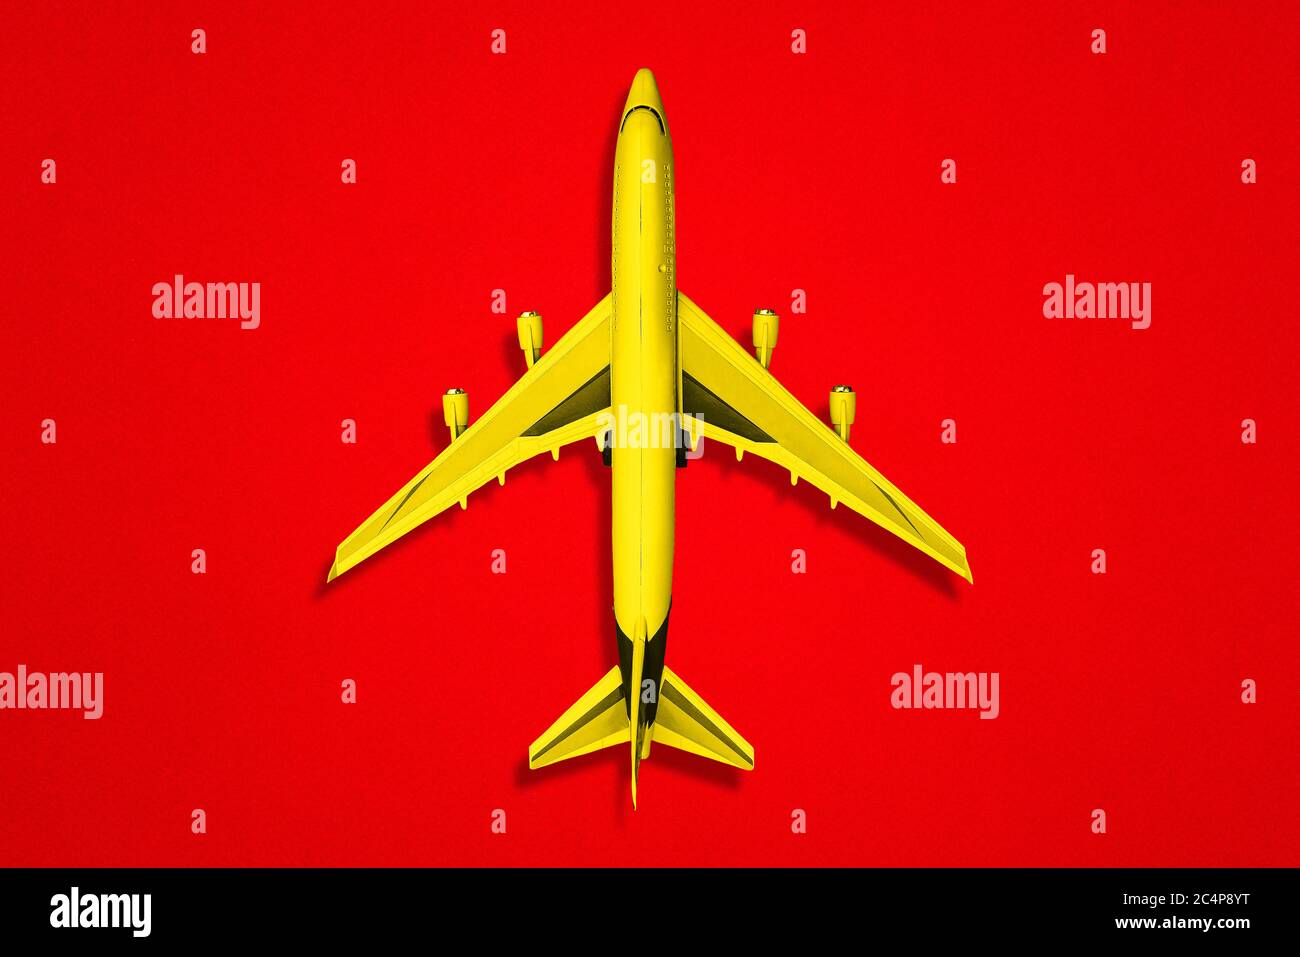 Yellow plane on a red background. A top view of a flat layout. Stock Photo